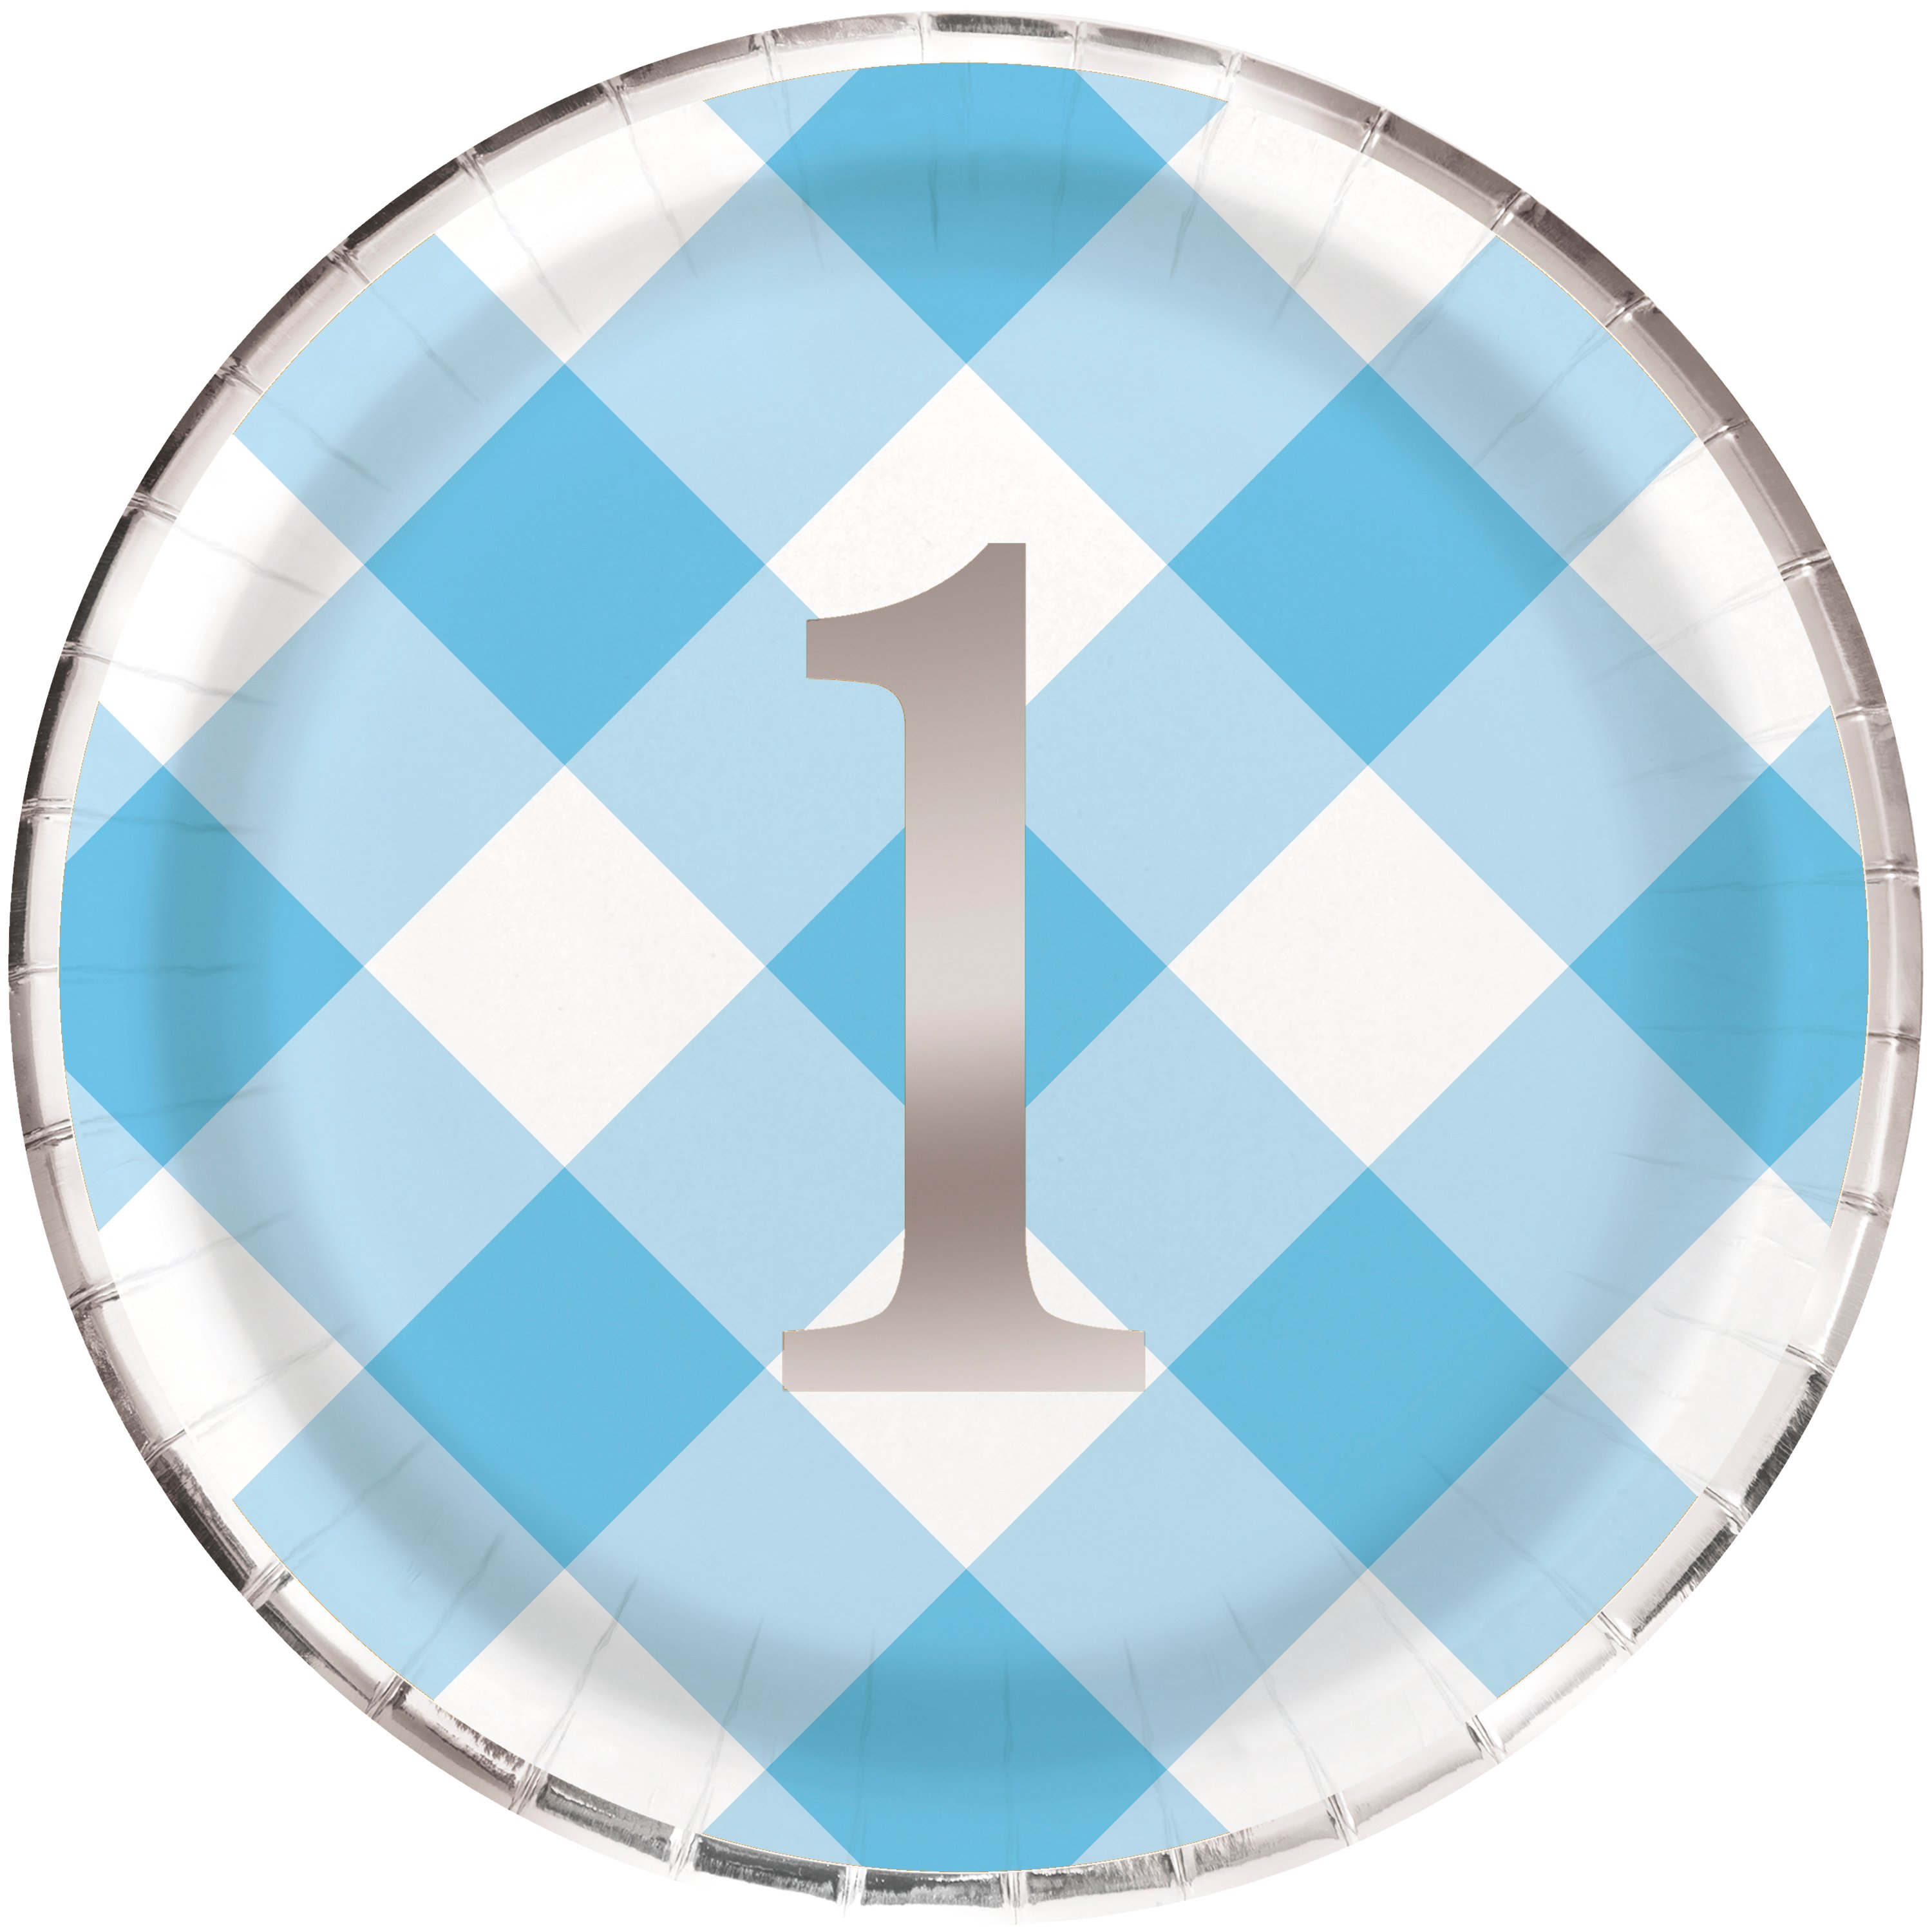 Blue Gingham 1st Birthday Party Tableware & Decorations Bundle - 16 Guests